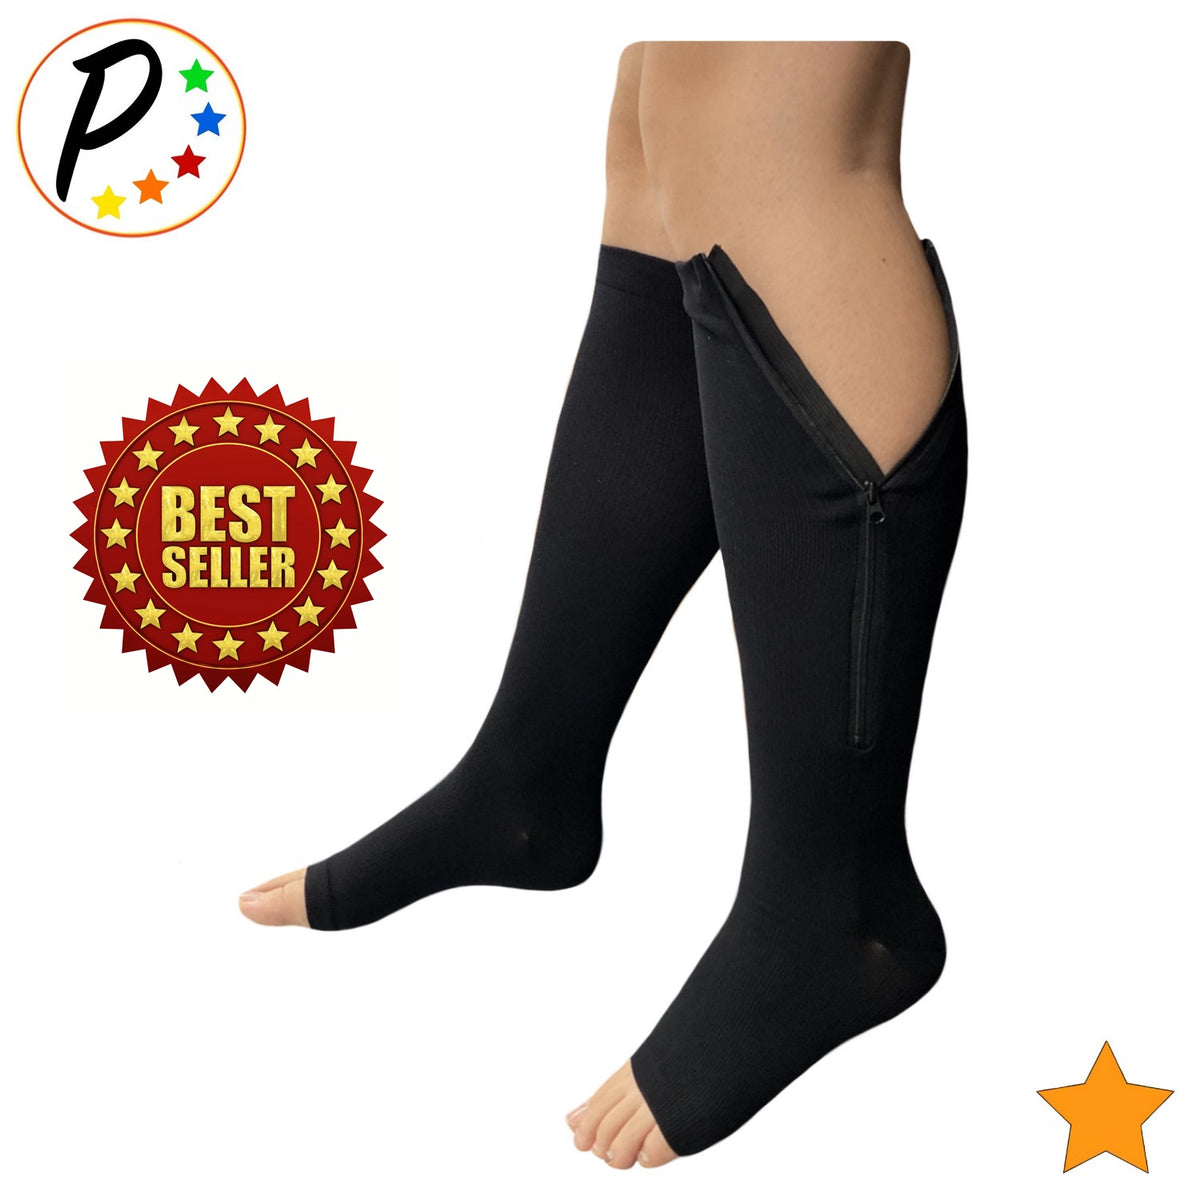 Zipper Compression Socks Women and Men, 2 Pairs Of 15-20mmhg Open Toe Knee  High Compression Stockings with Zipper